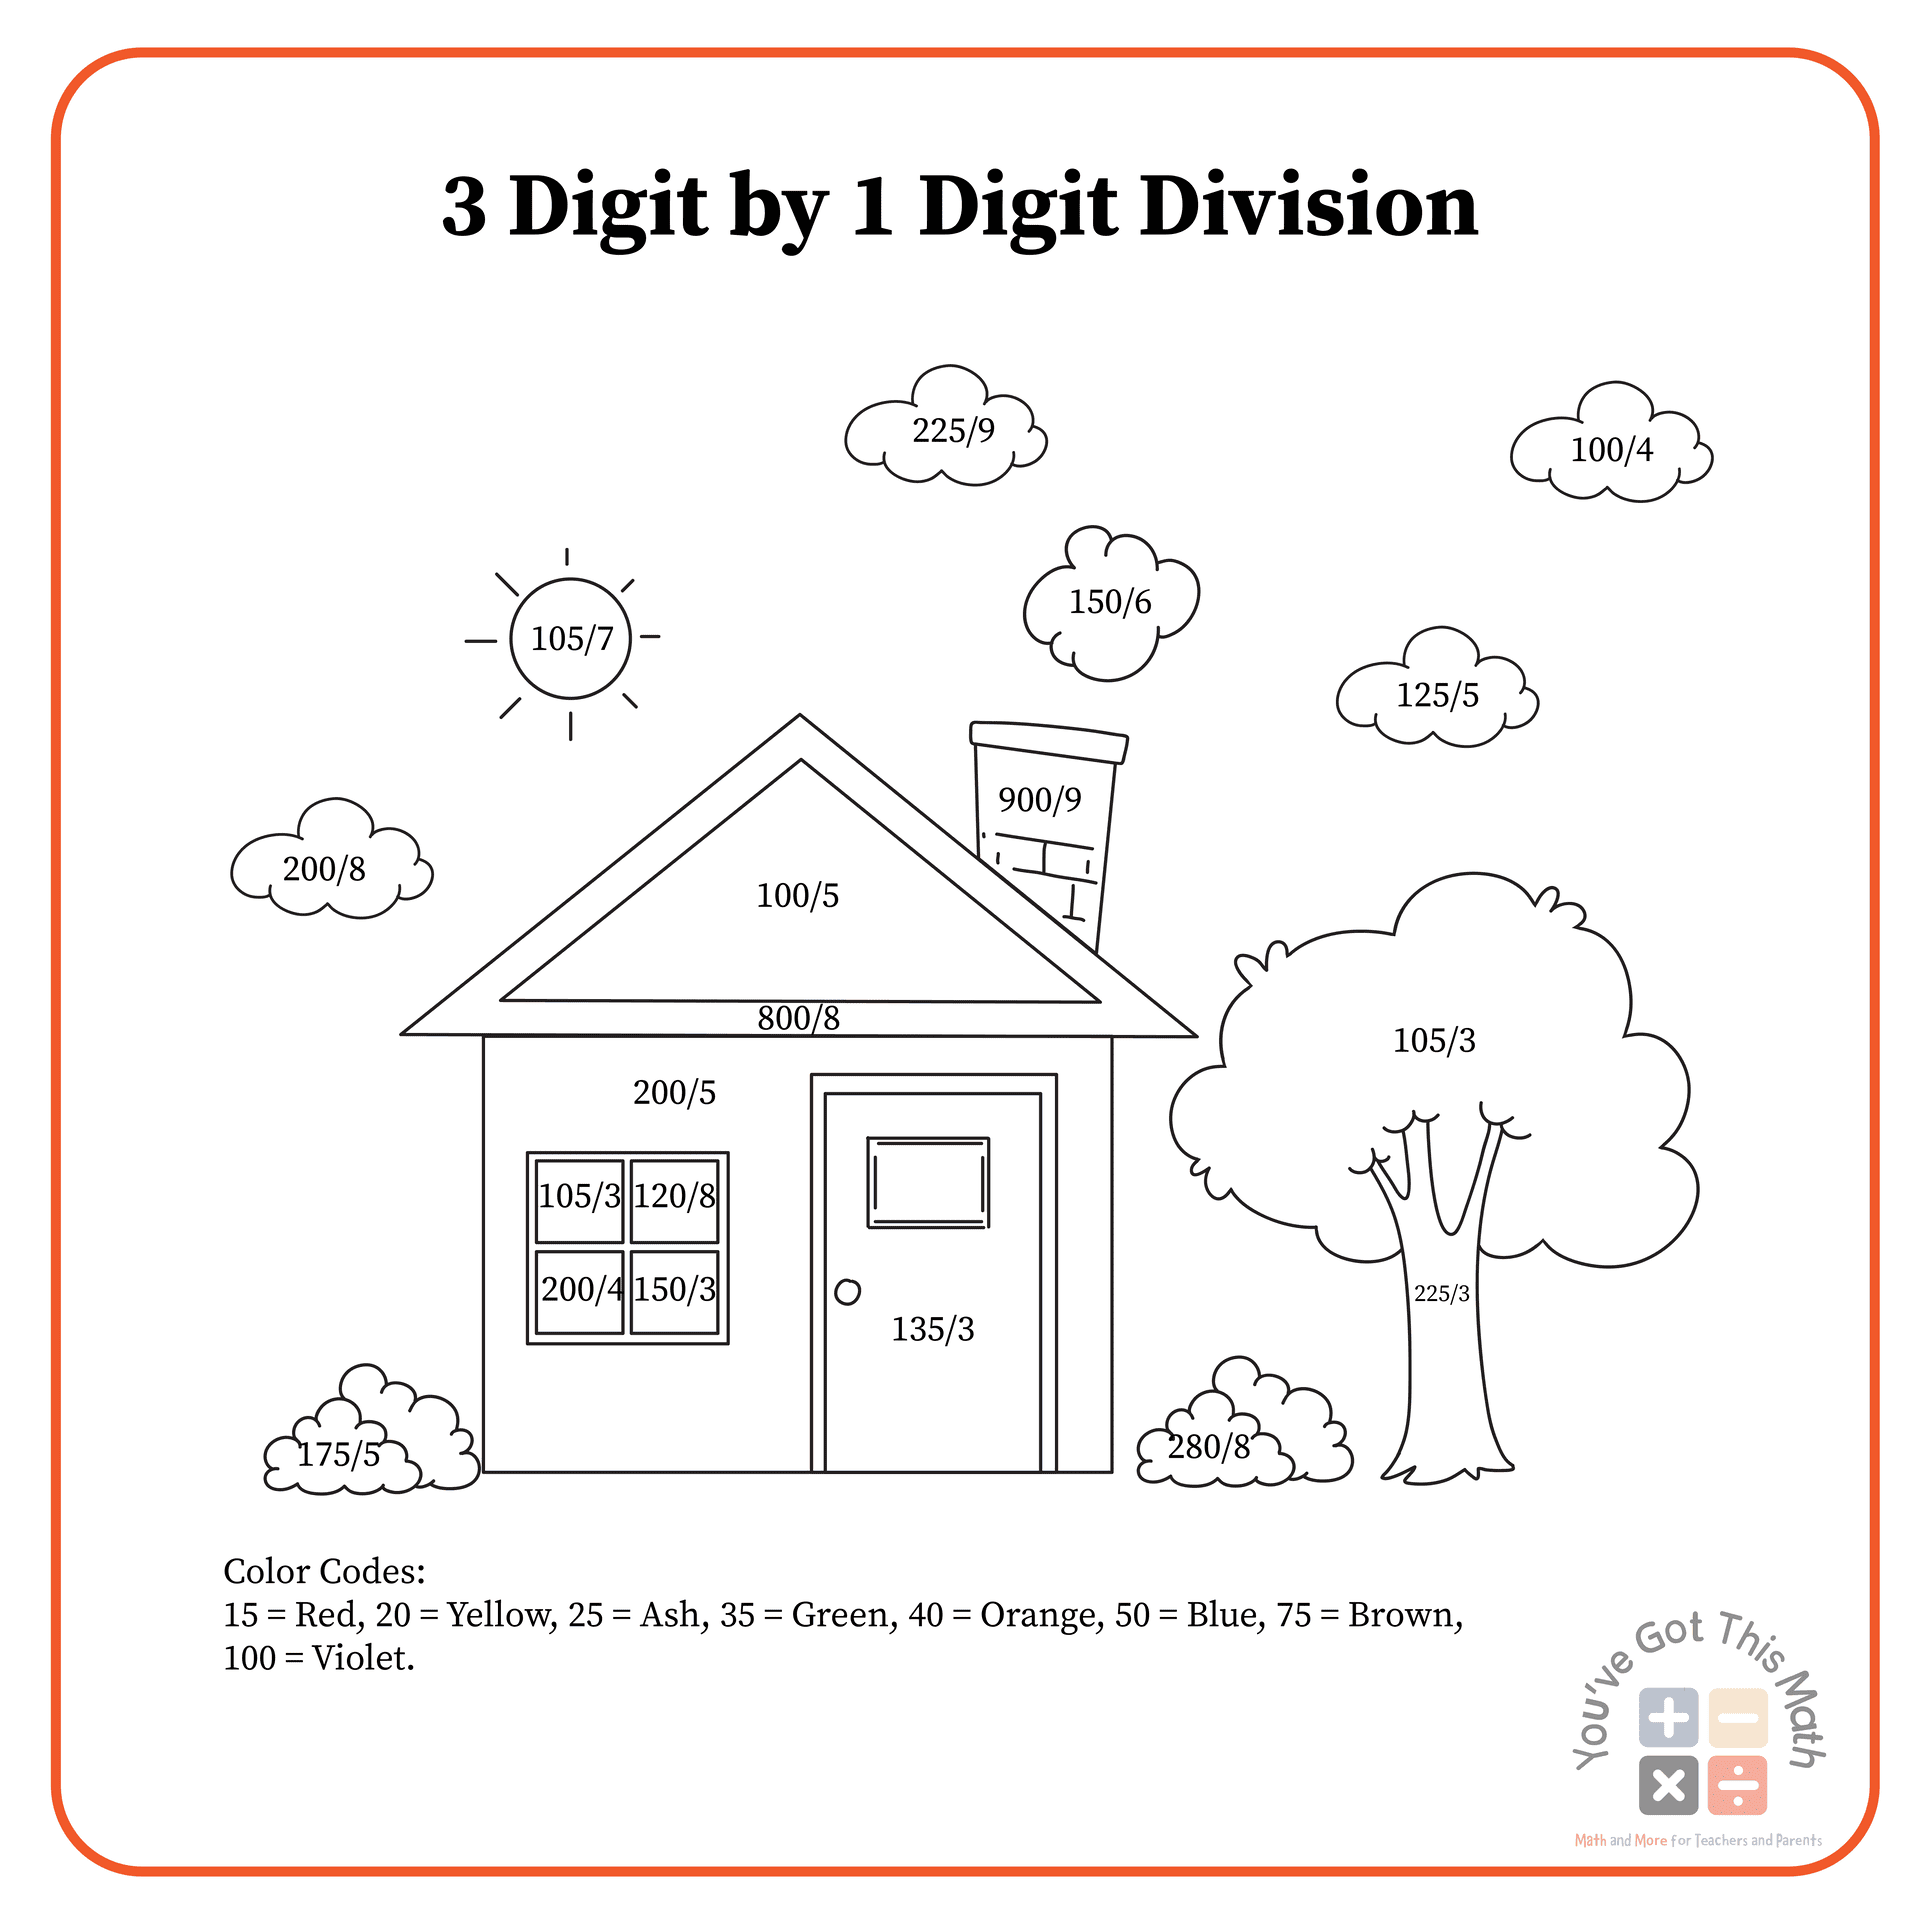 3 Digit by 1 digit division in Division coloring worksheets